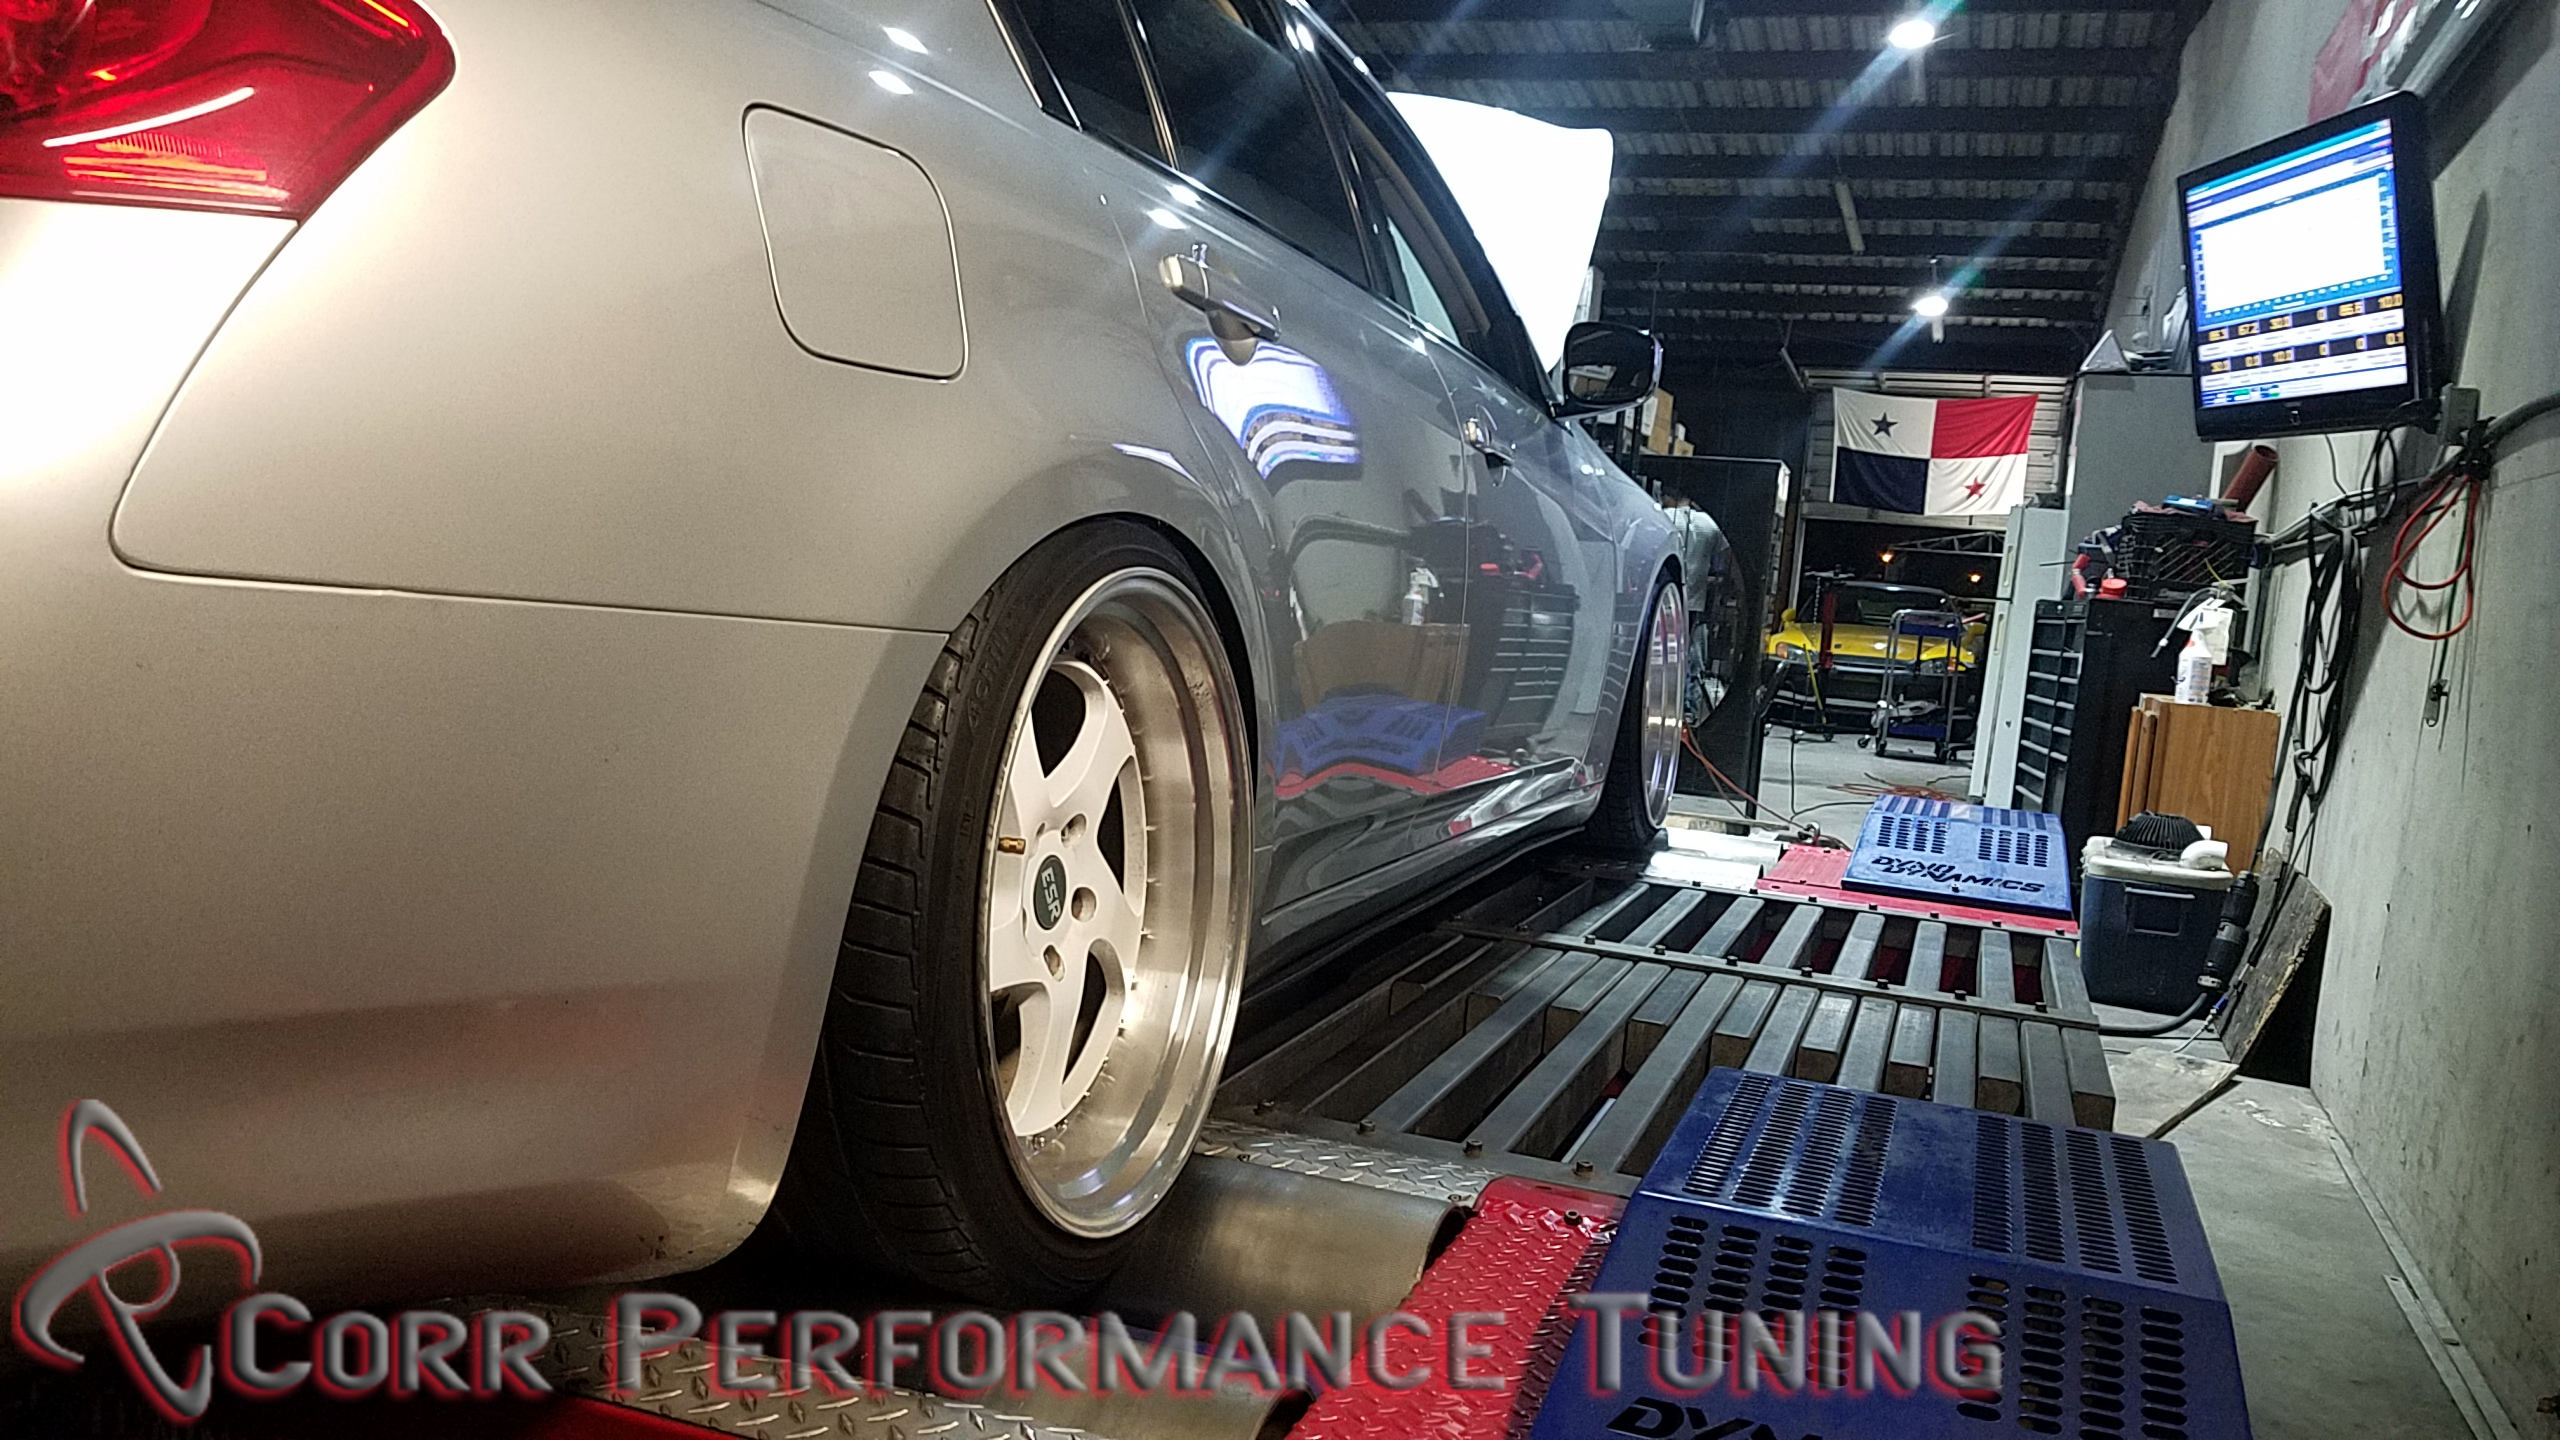 Welcome to Corr Performance Tuning